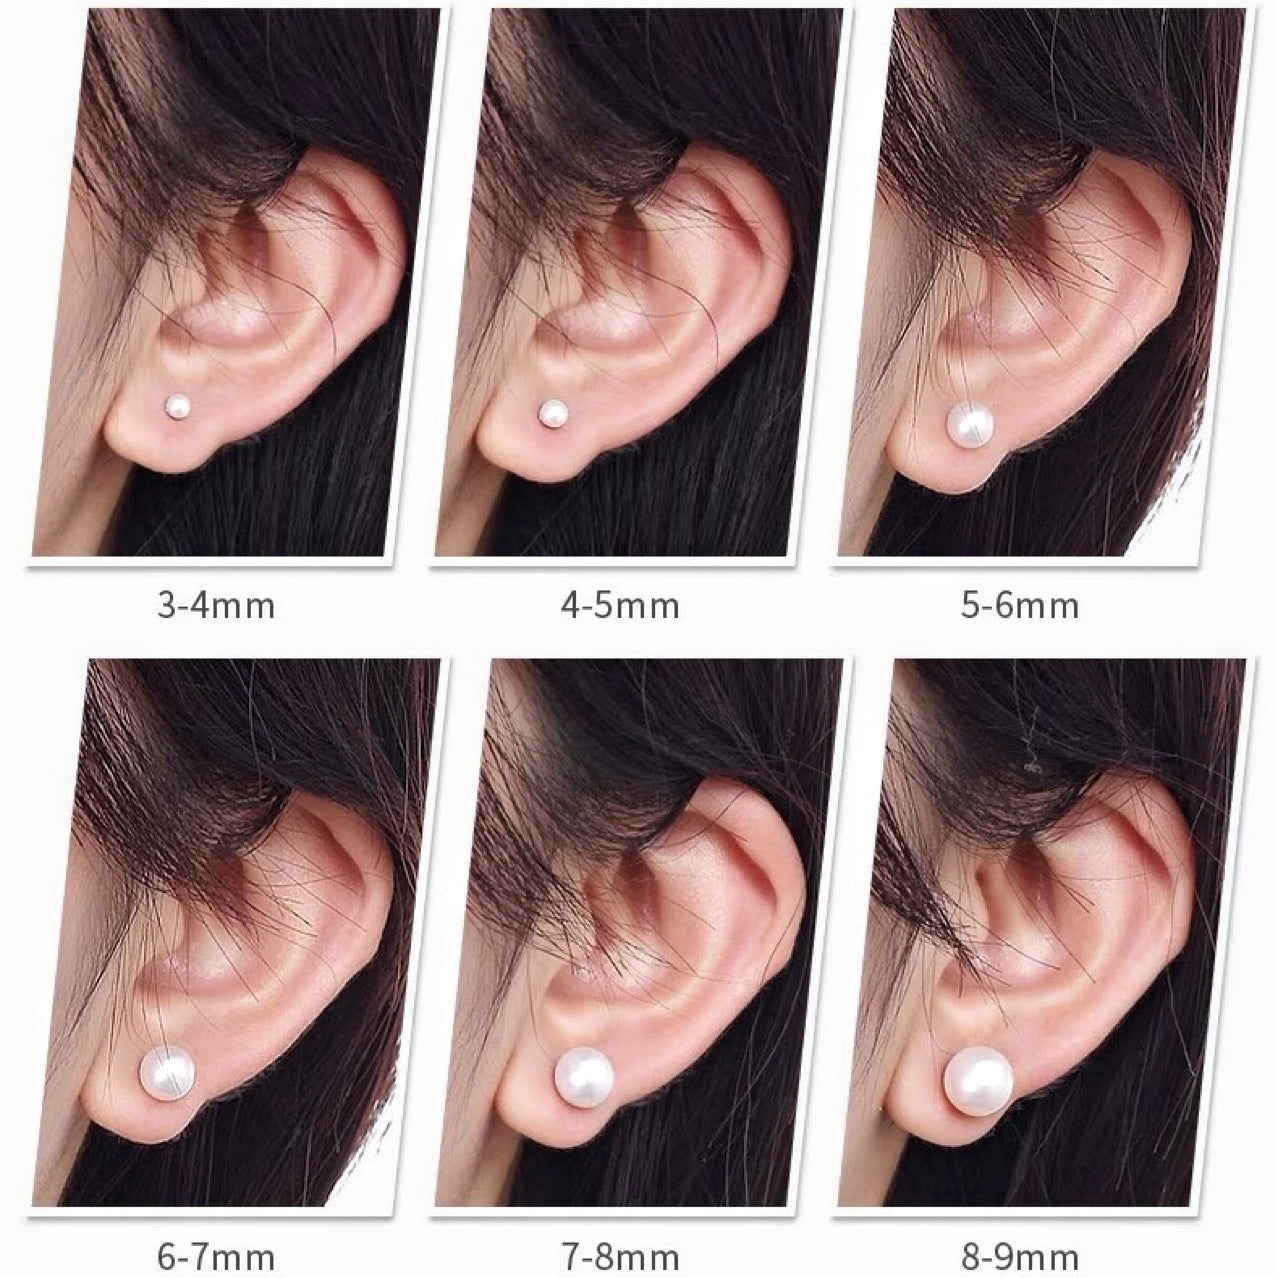 model showing different sizes of pearl studs earrings 